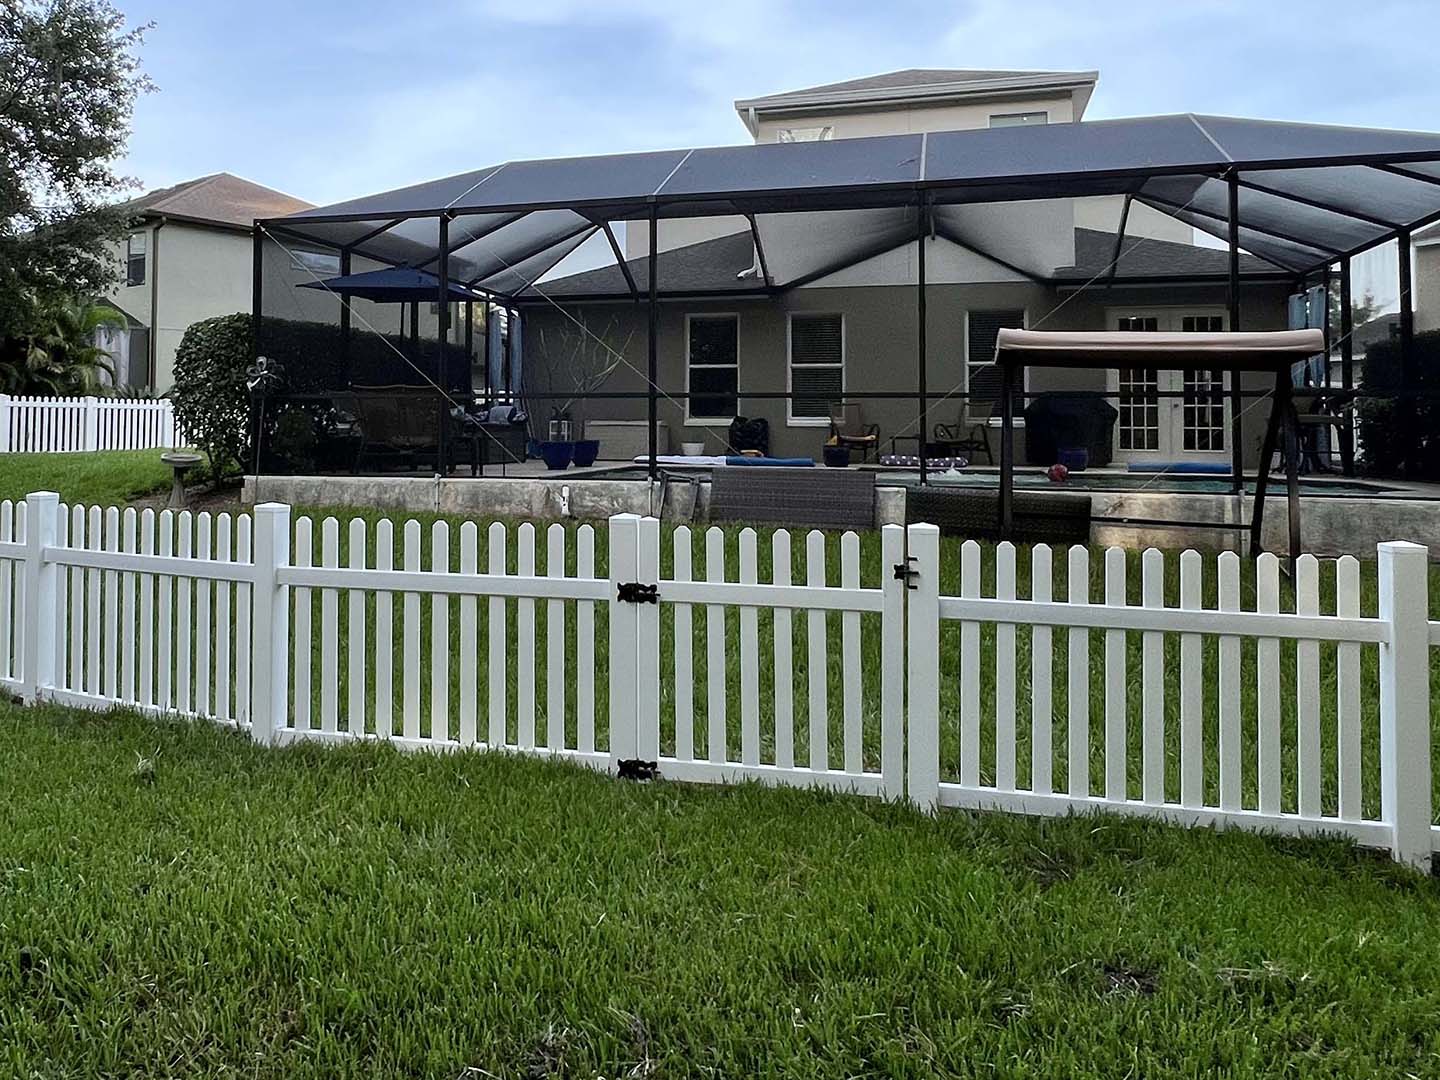 Lutz Florida residential fencing company